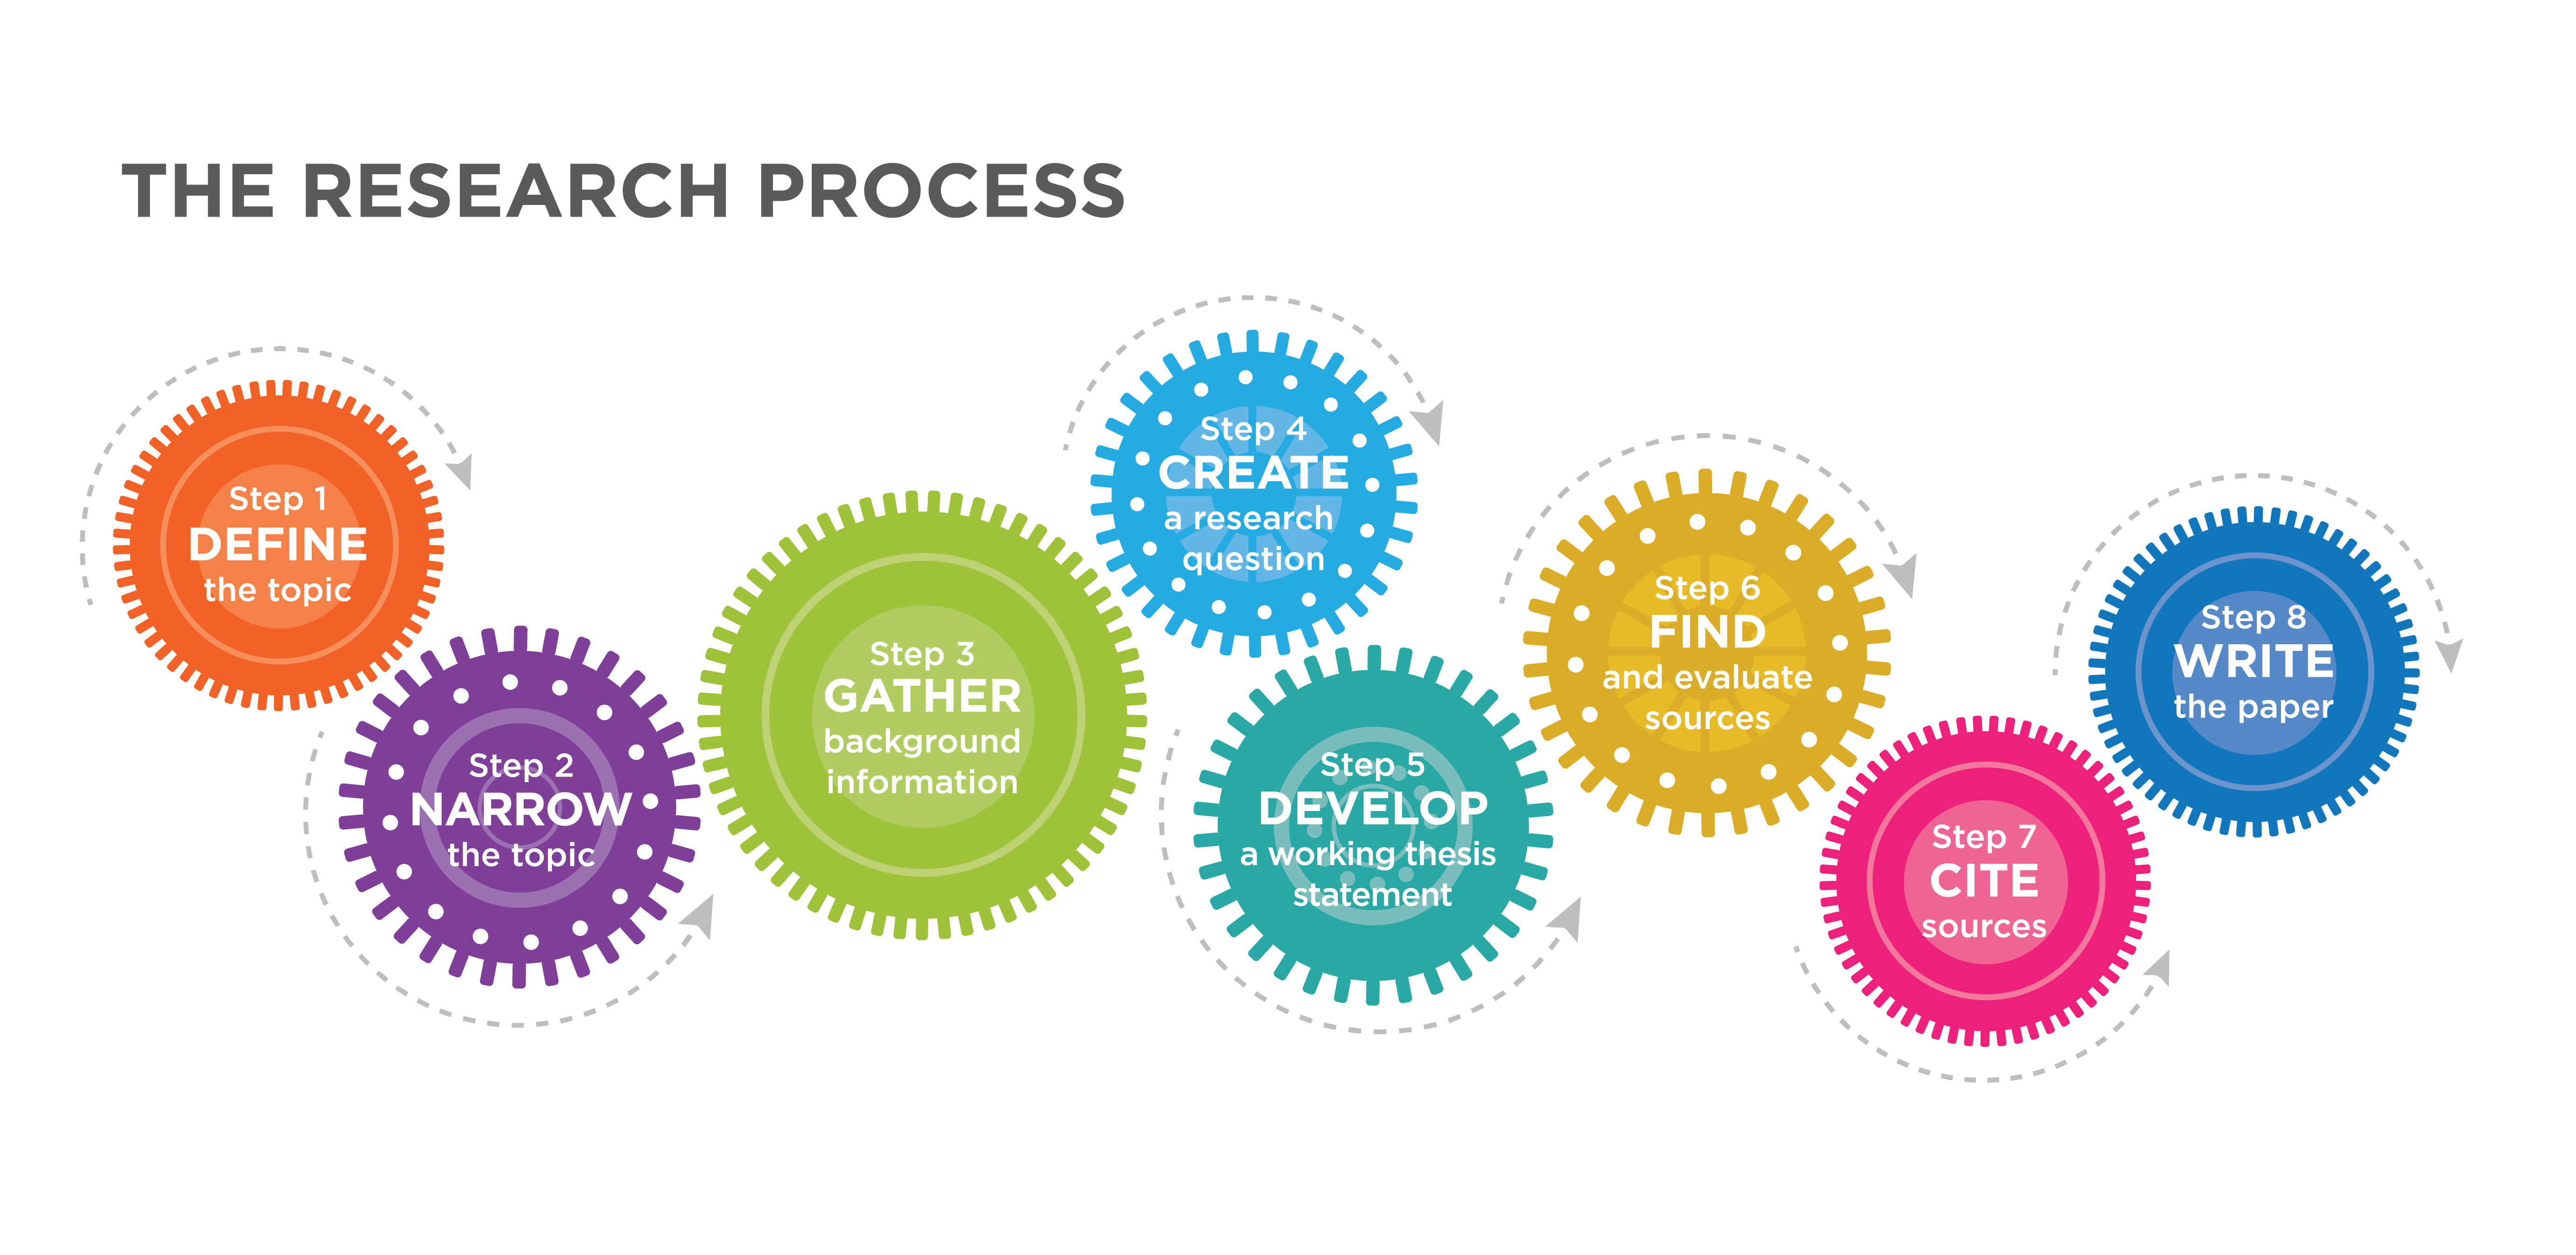 Gears showing the eight steps of the research process from beginning to end: define the topic, narrow the topic, gather background information, create a research question, develop a working thesis statement, find and evaluate sources, cite sources, and write the paper.